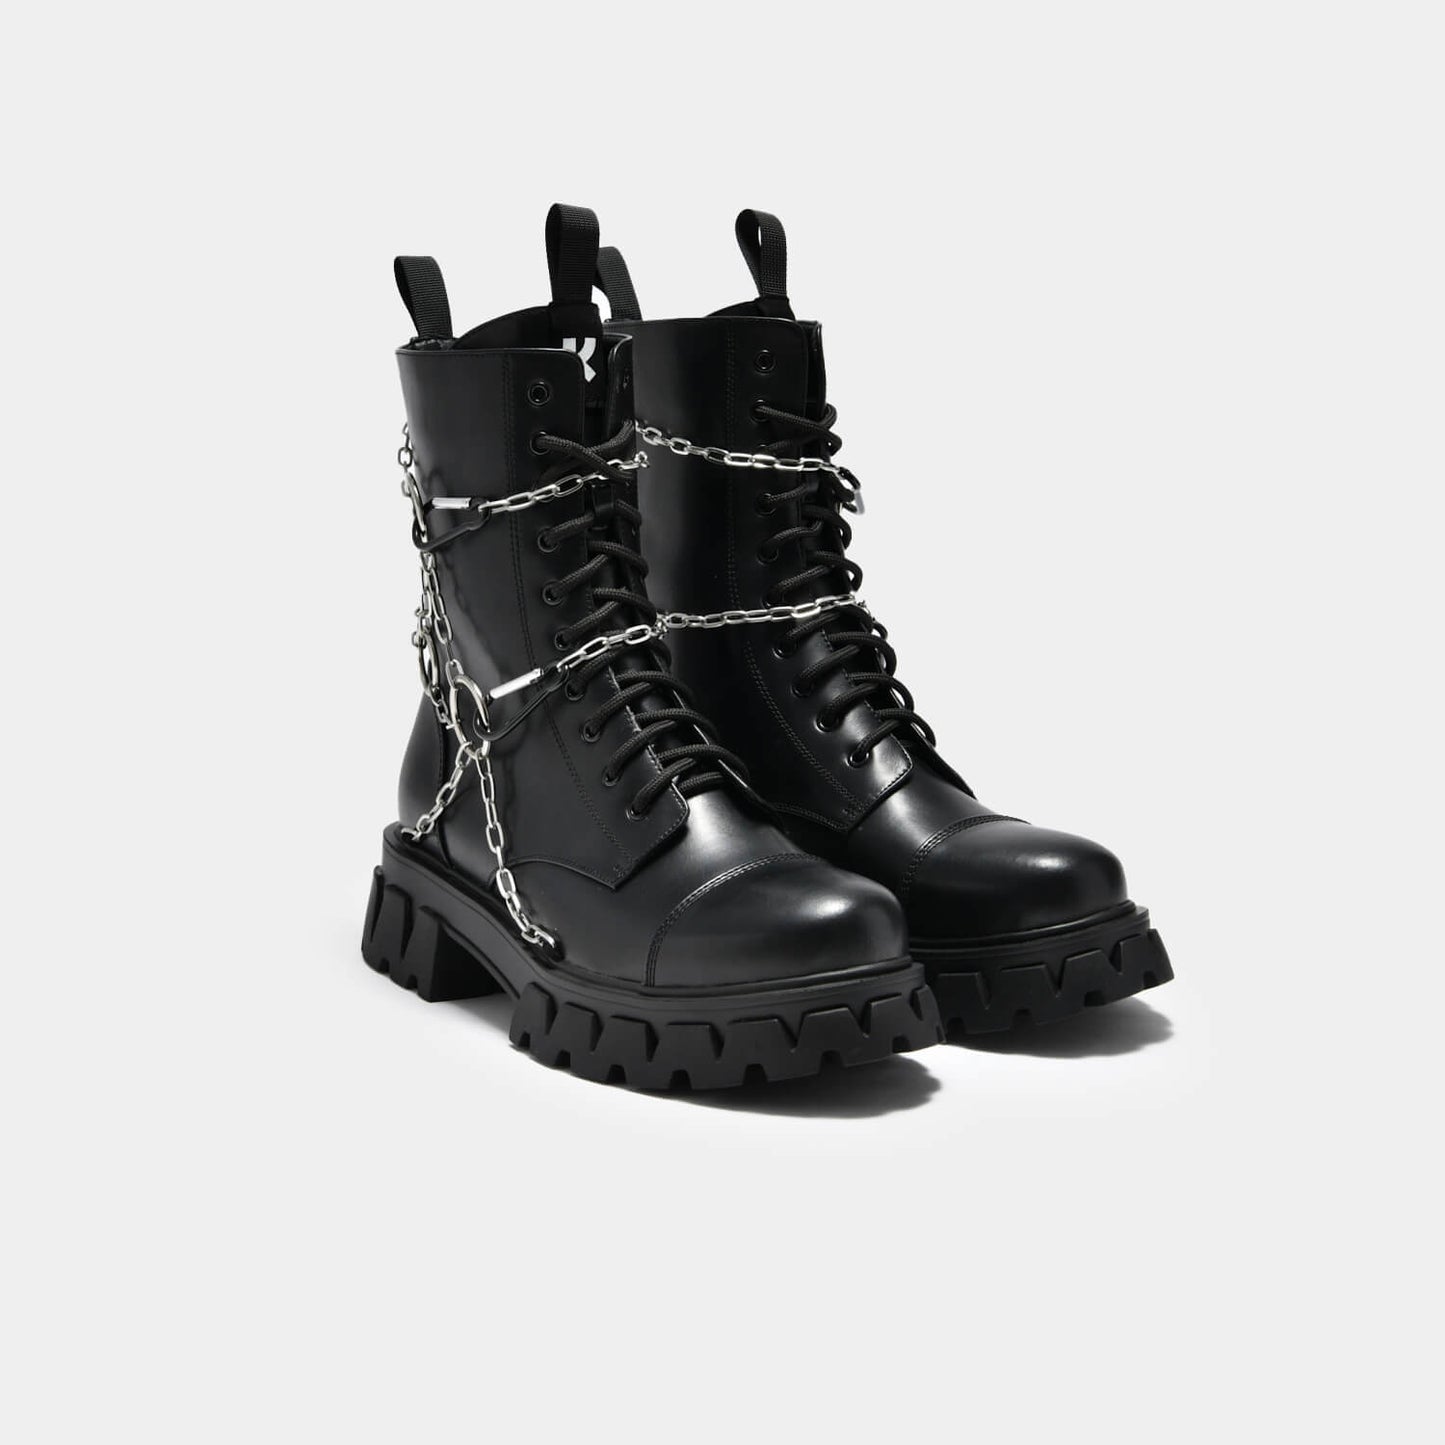 Cyrus Chain Boots - Ankle Boots - KOI Footwear - Black - Three-Quarter View